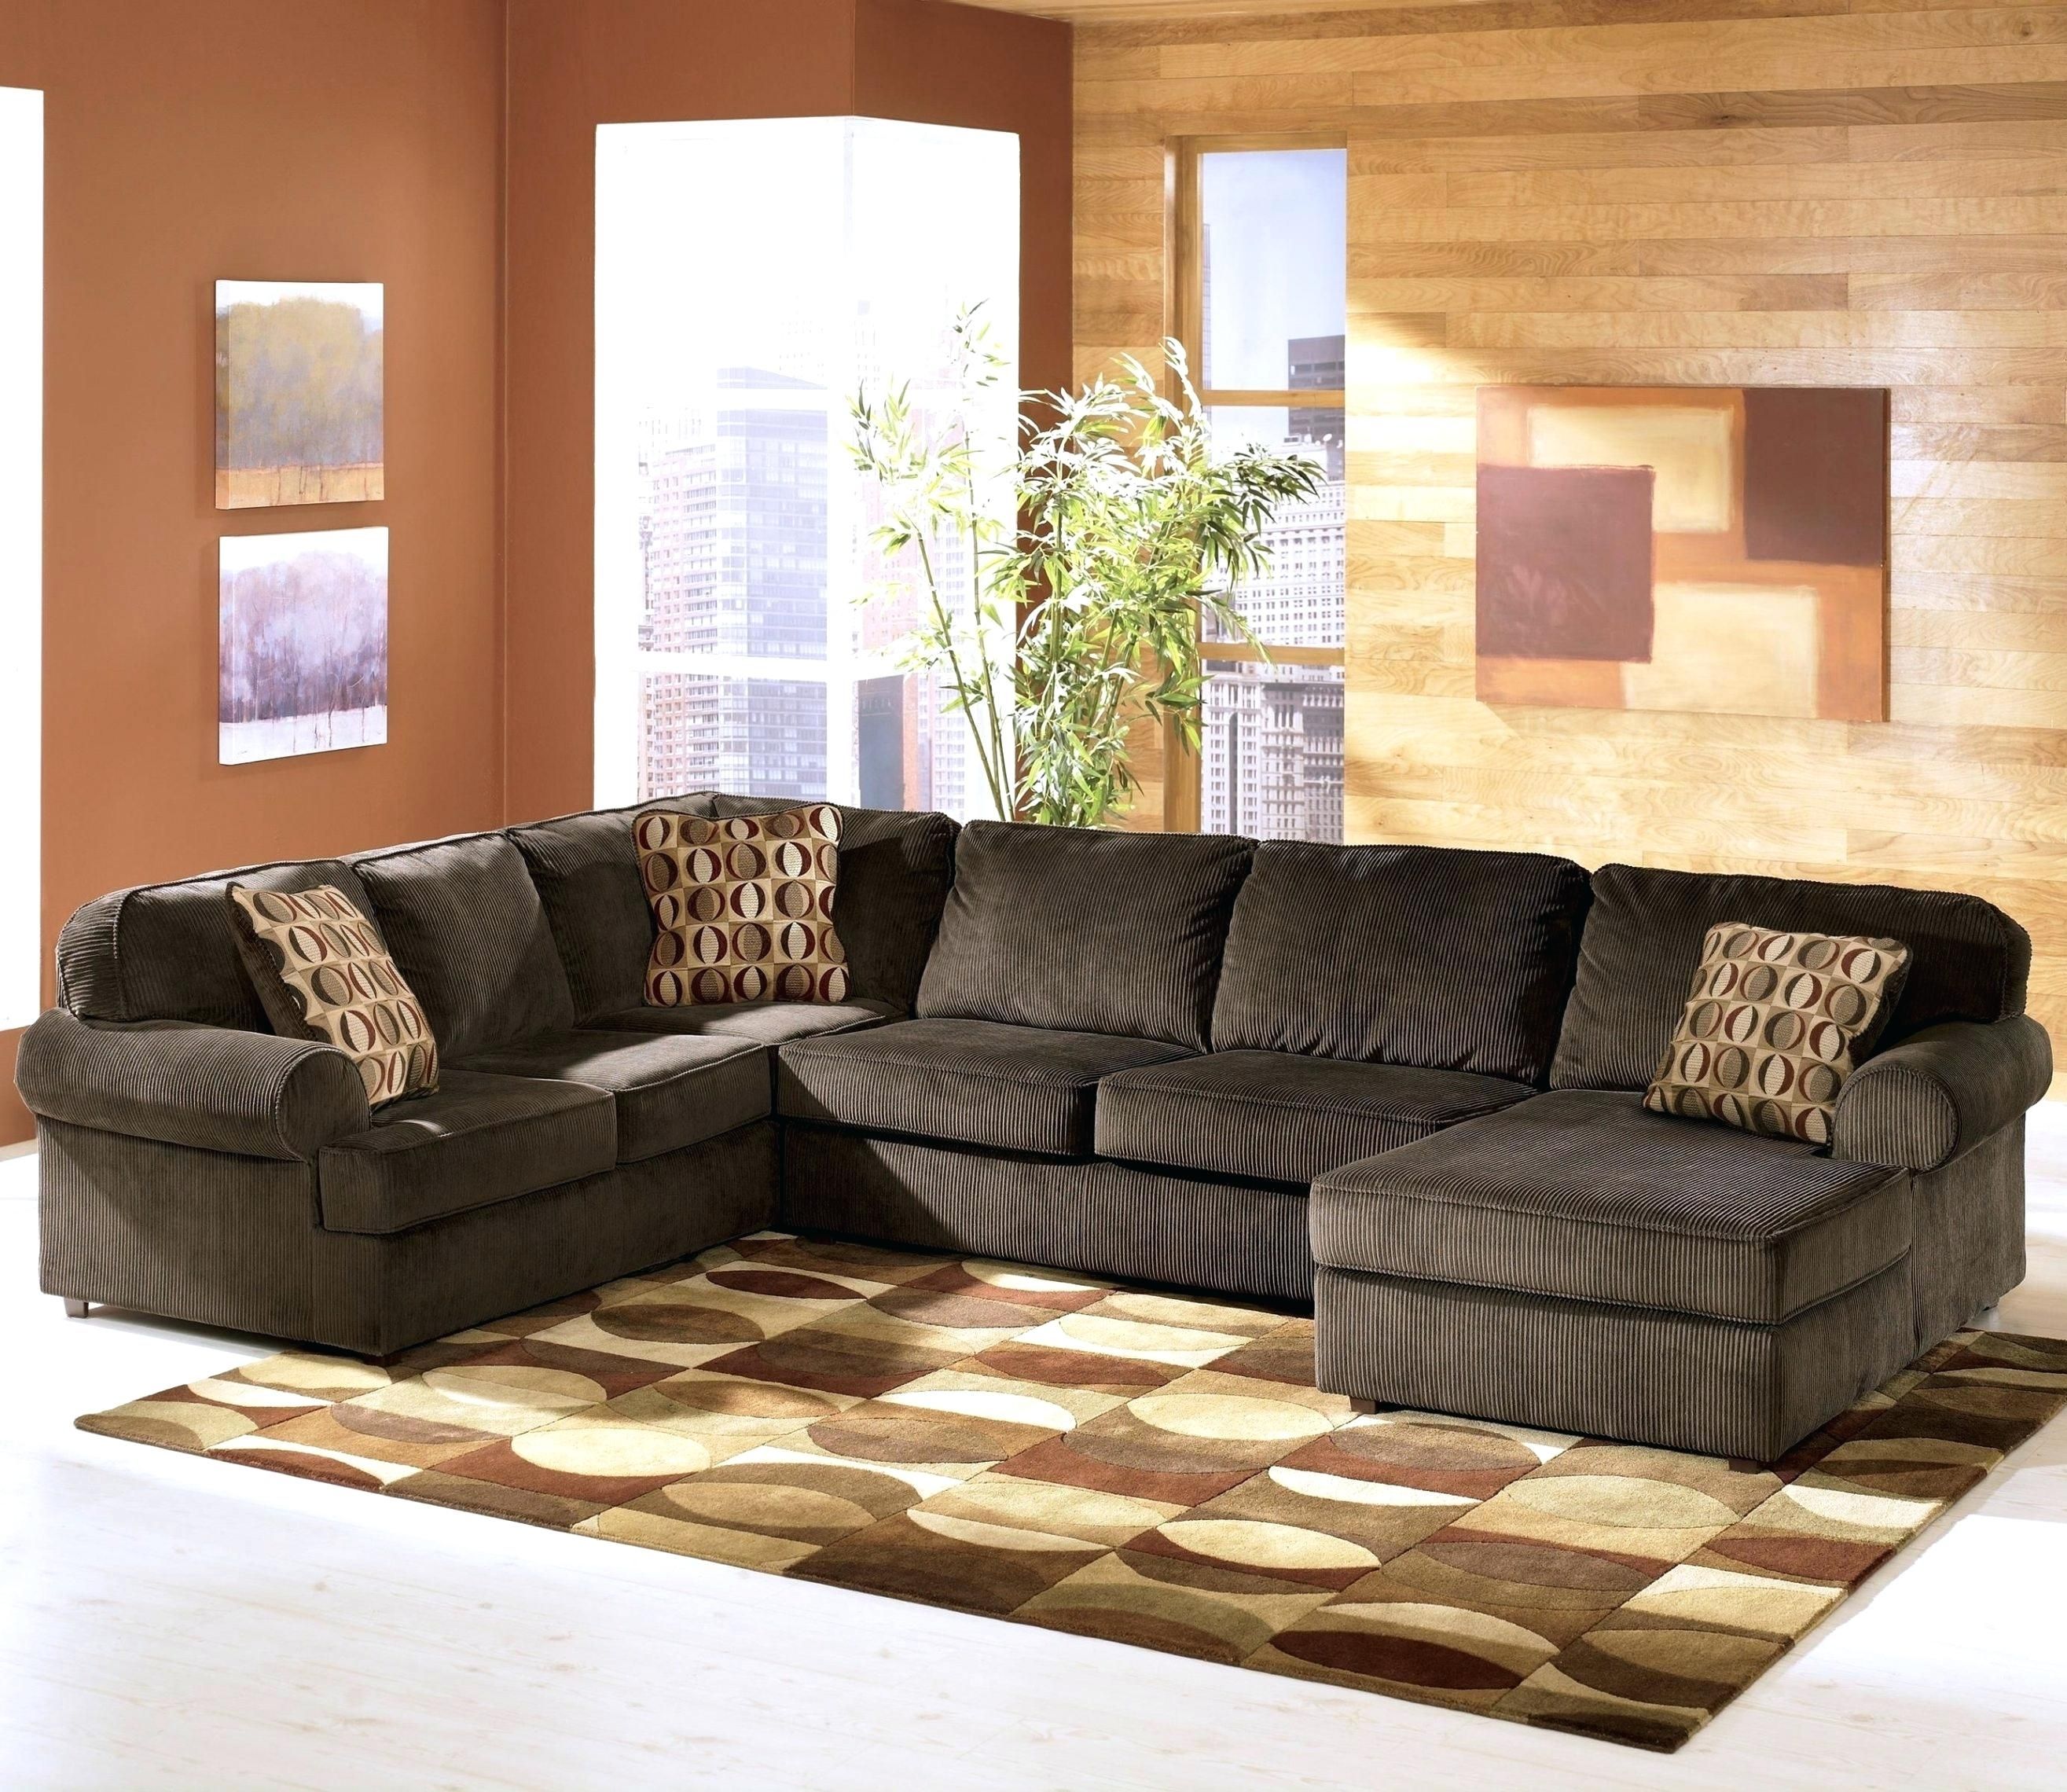 Ashley Furniture Tuscaloosa Al Home Design Ideas And Pictures Within Tuscaloosa Sectional Sofas (View 4 of 10)